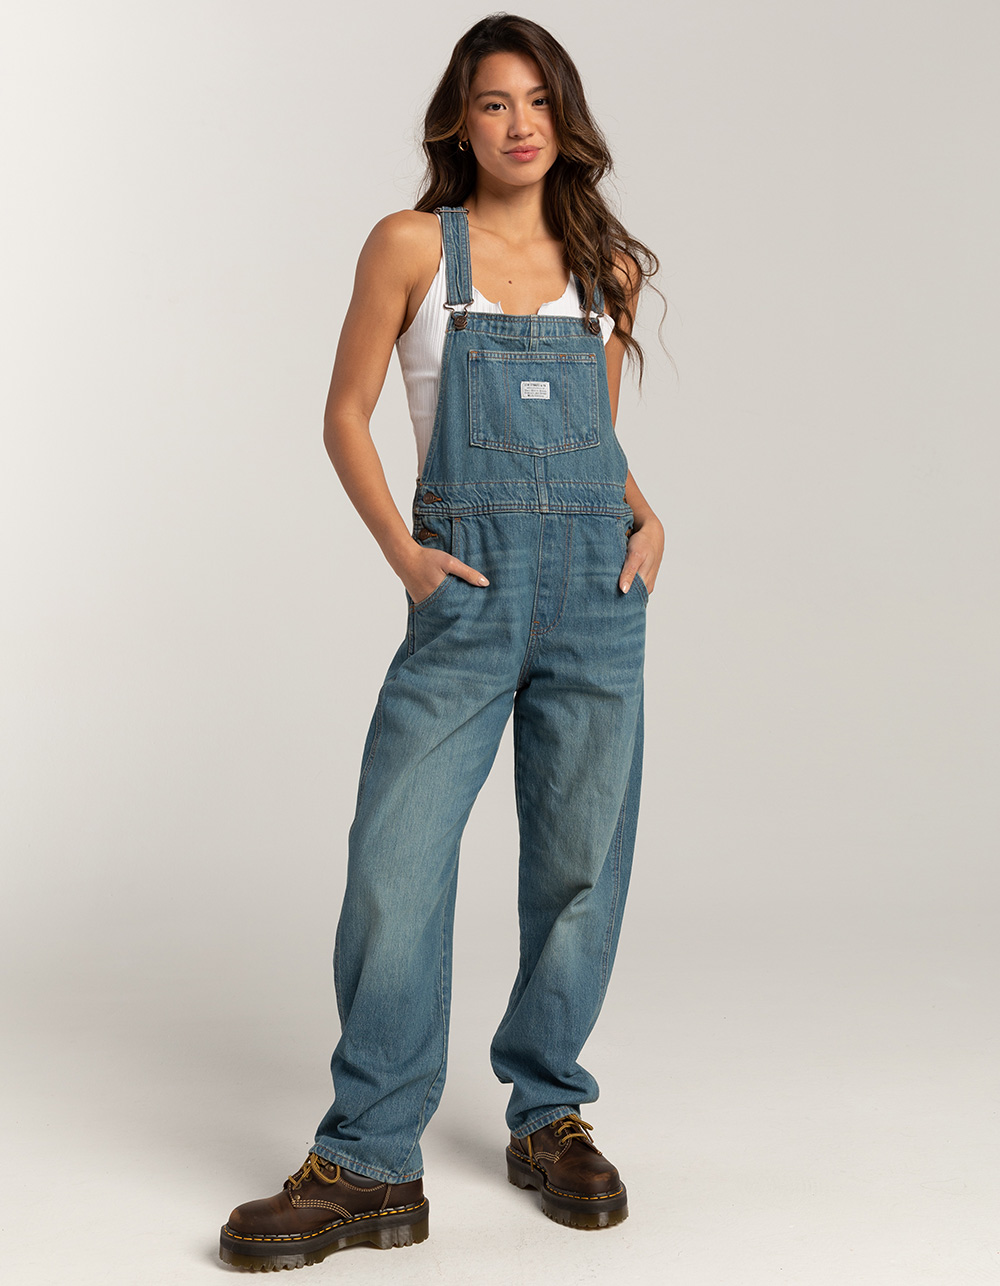 LEVI'S Womens Overalls - Fresh Perspective